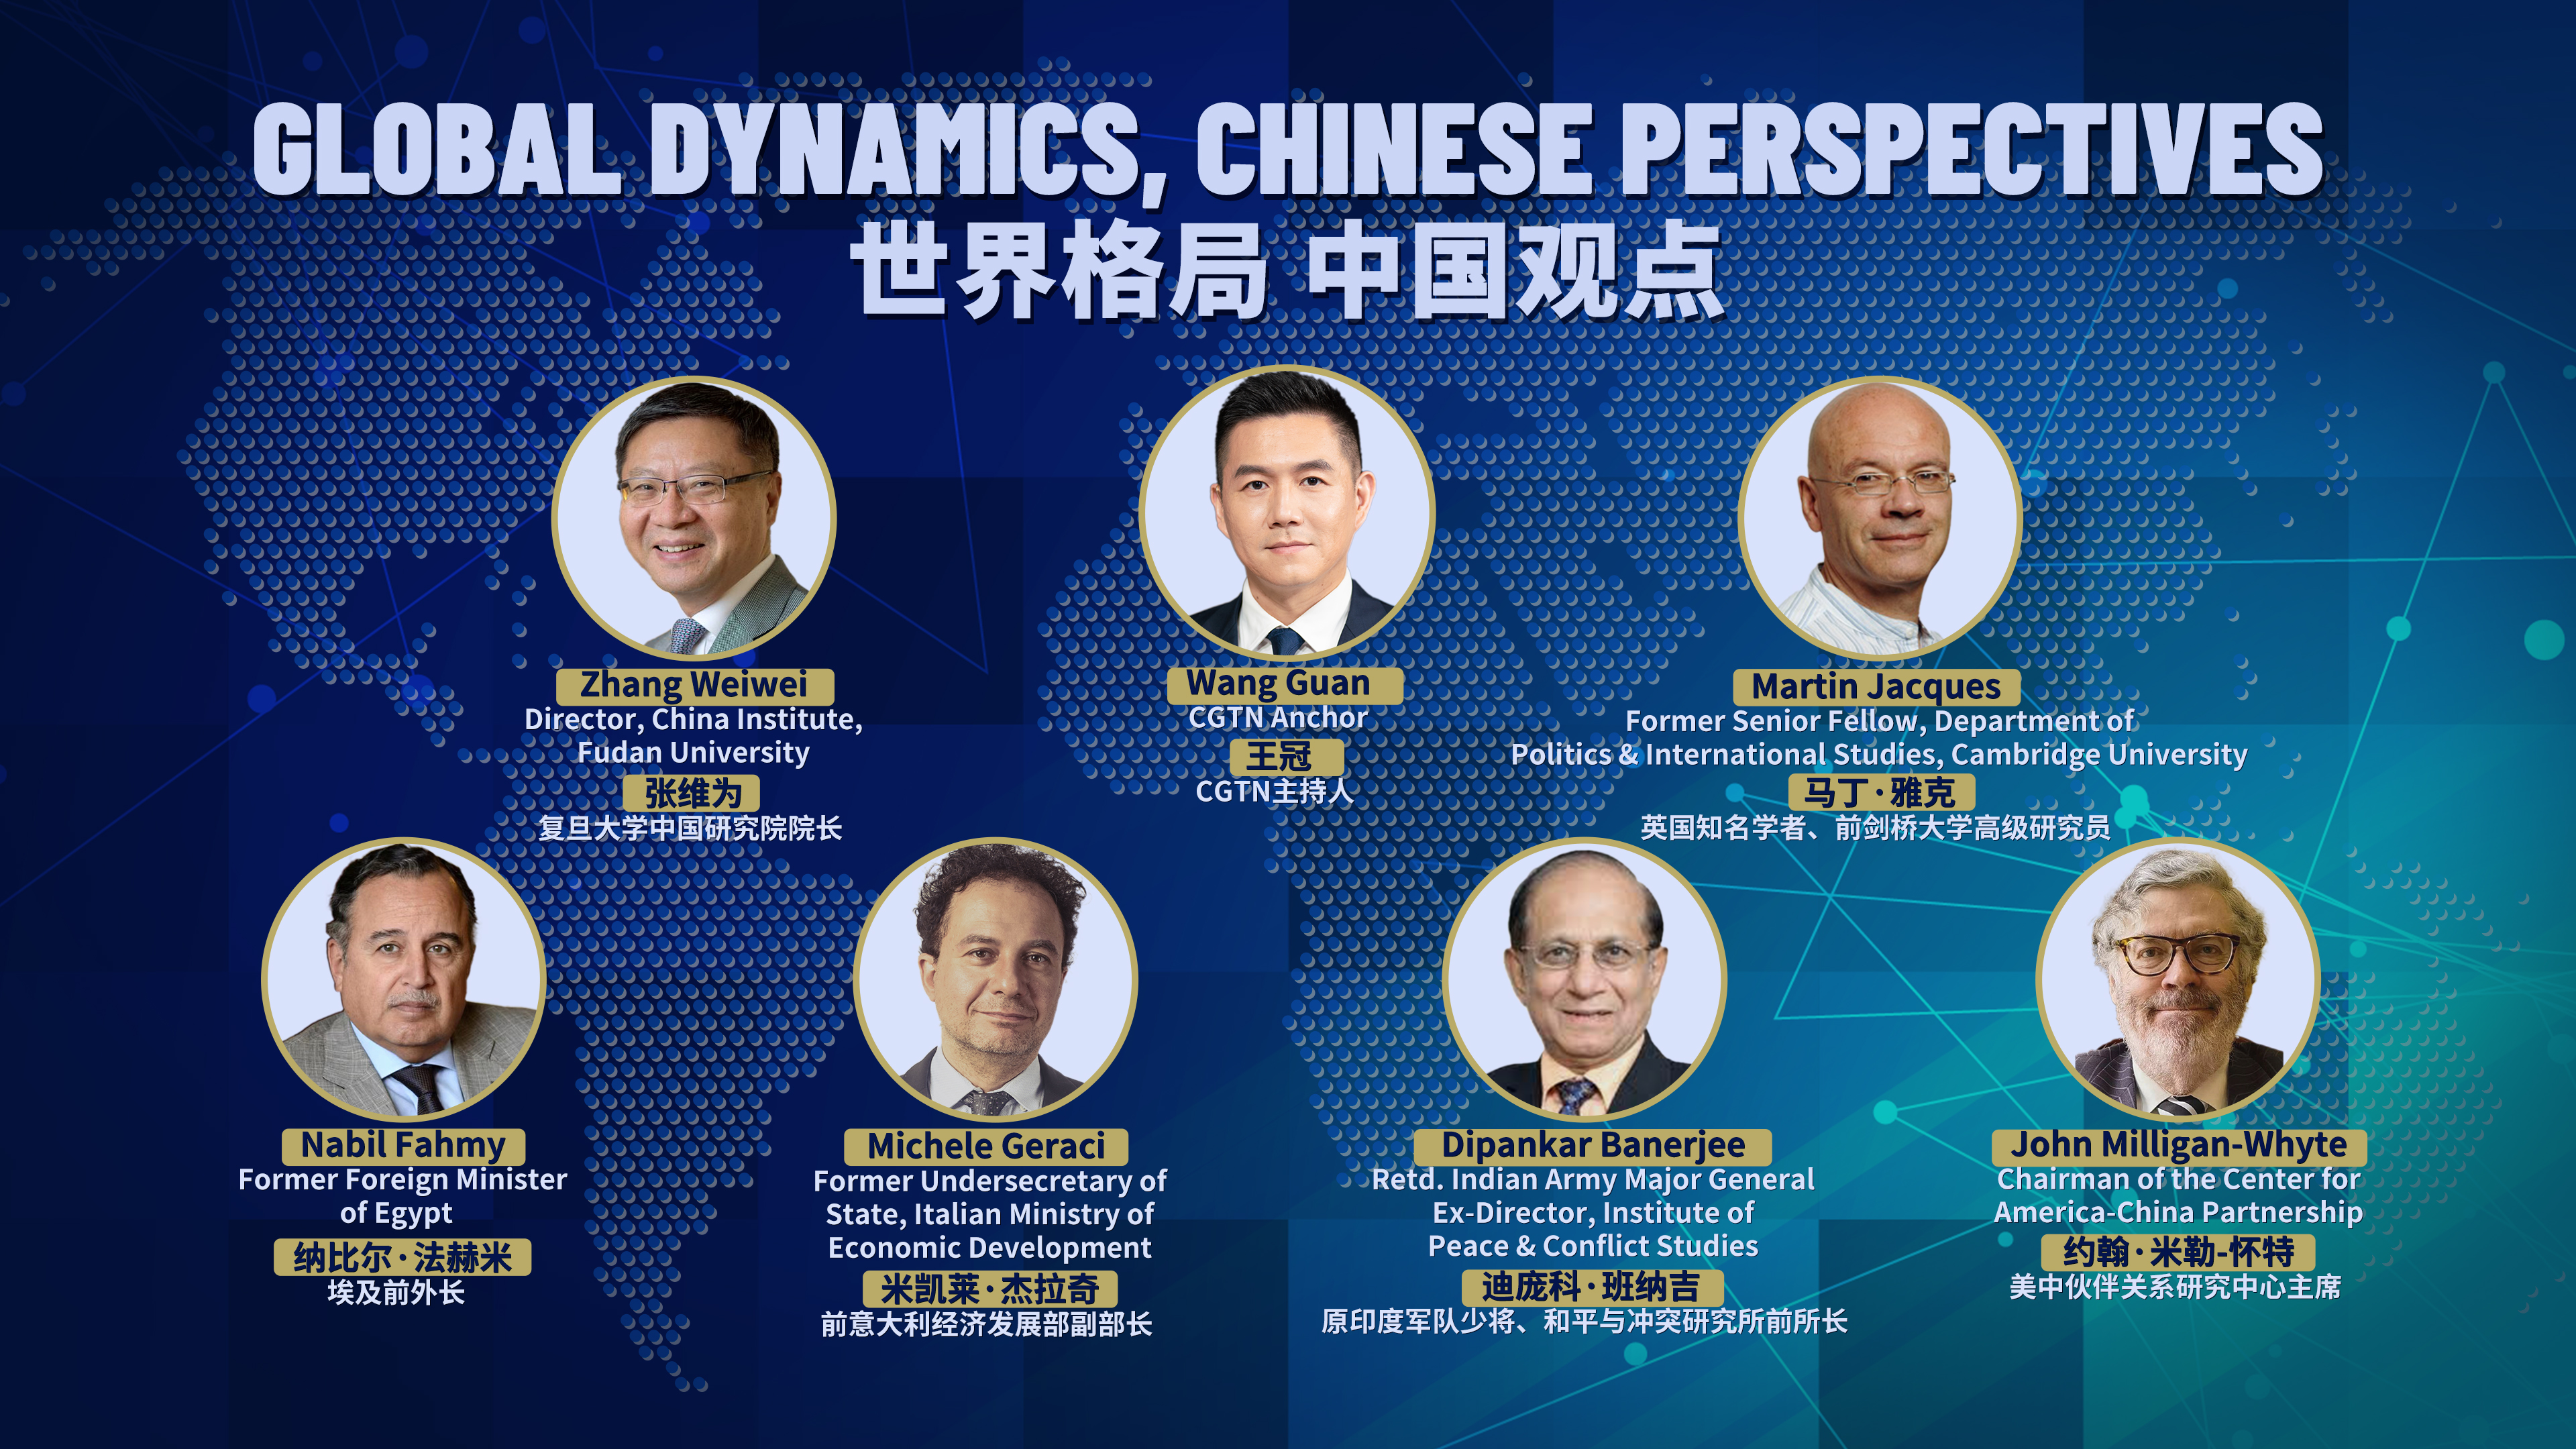 Watch: Global dynamics, Chinese perspectives